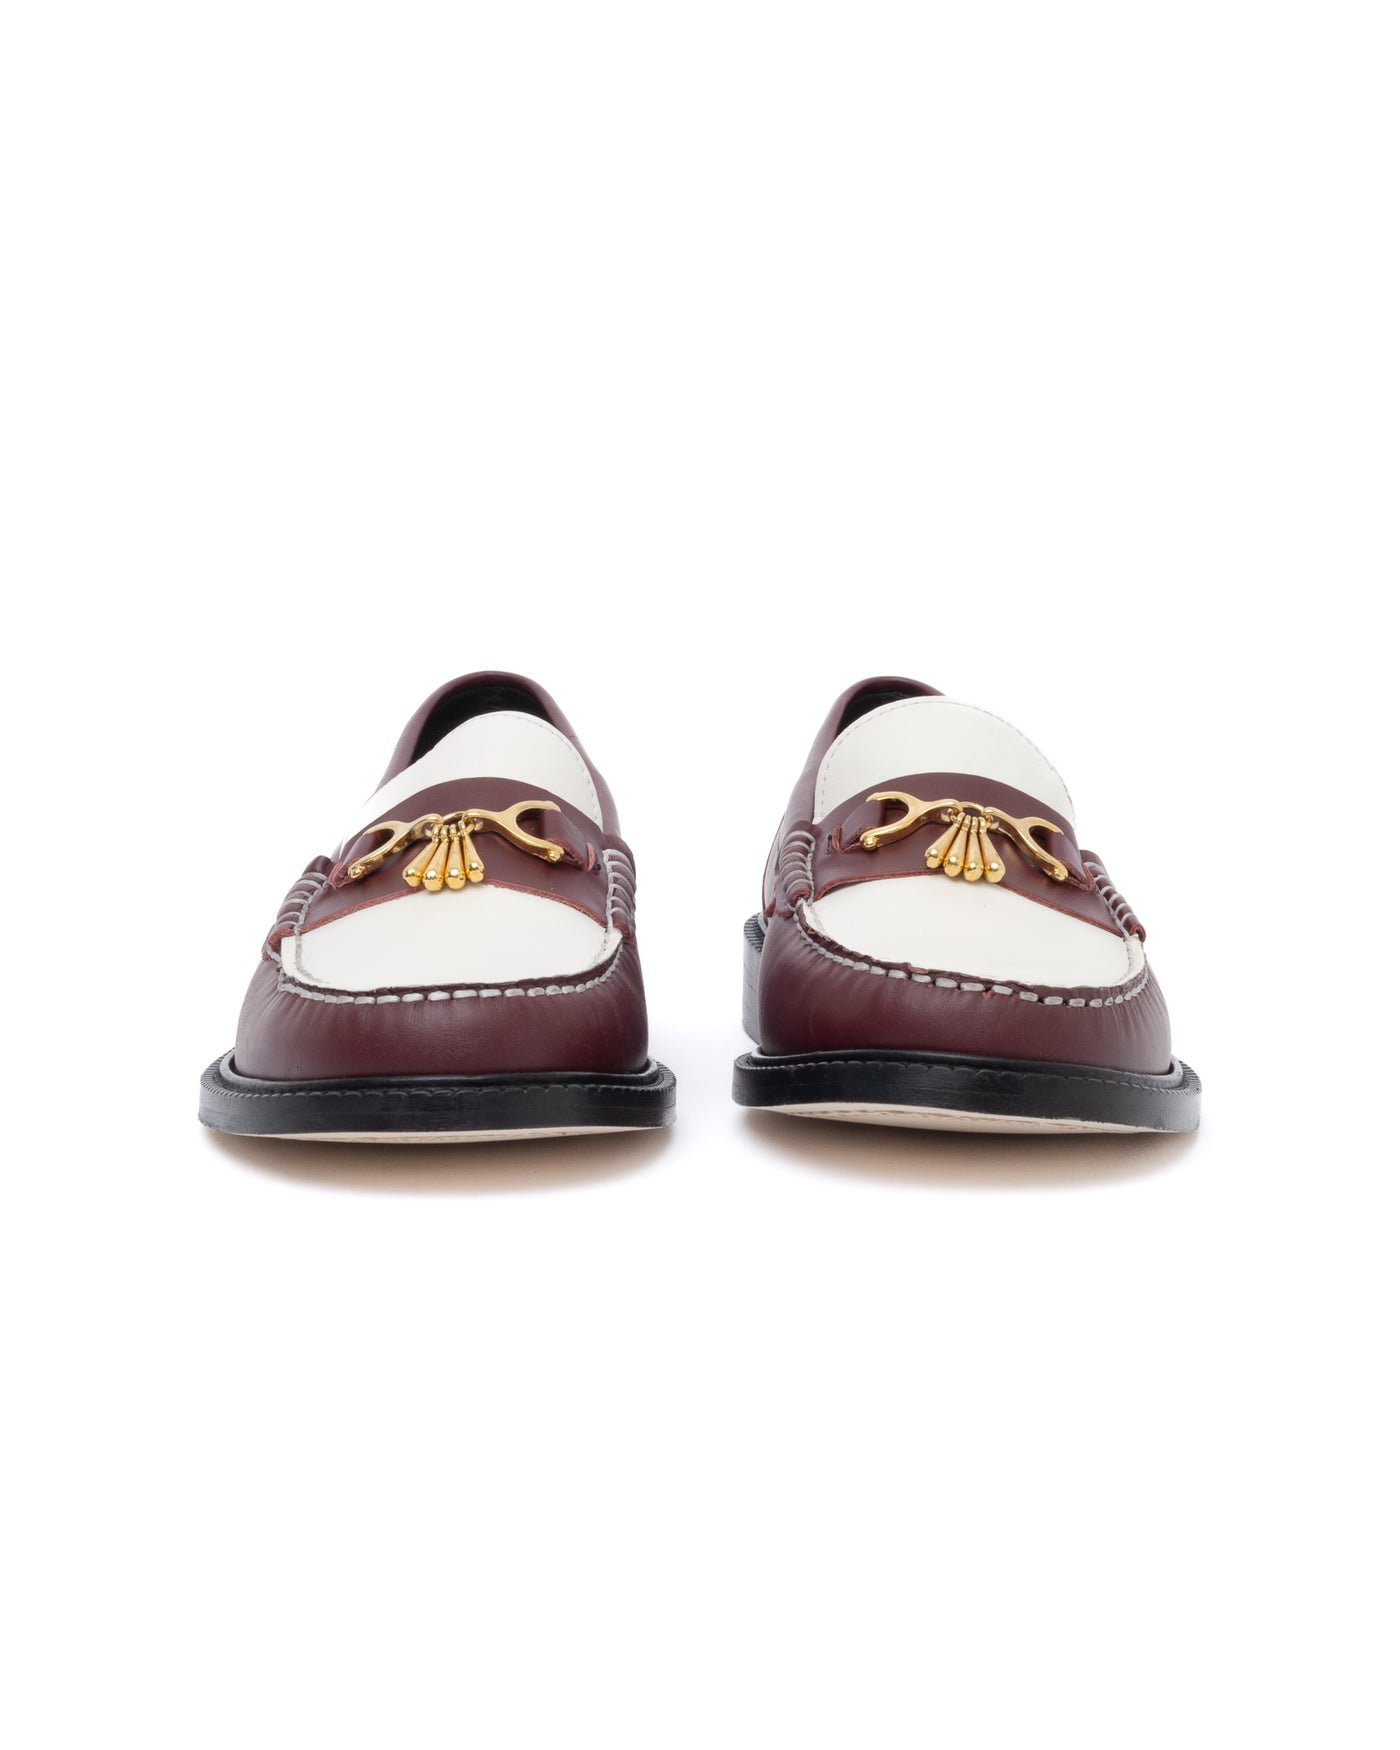 Vinny's Lux Mocassin Snaffle Loafer Crust Leather Burgundy/White